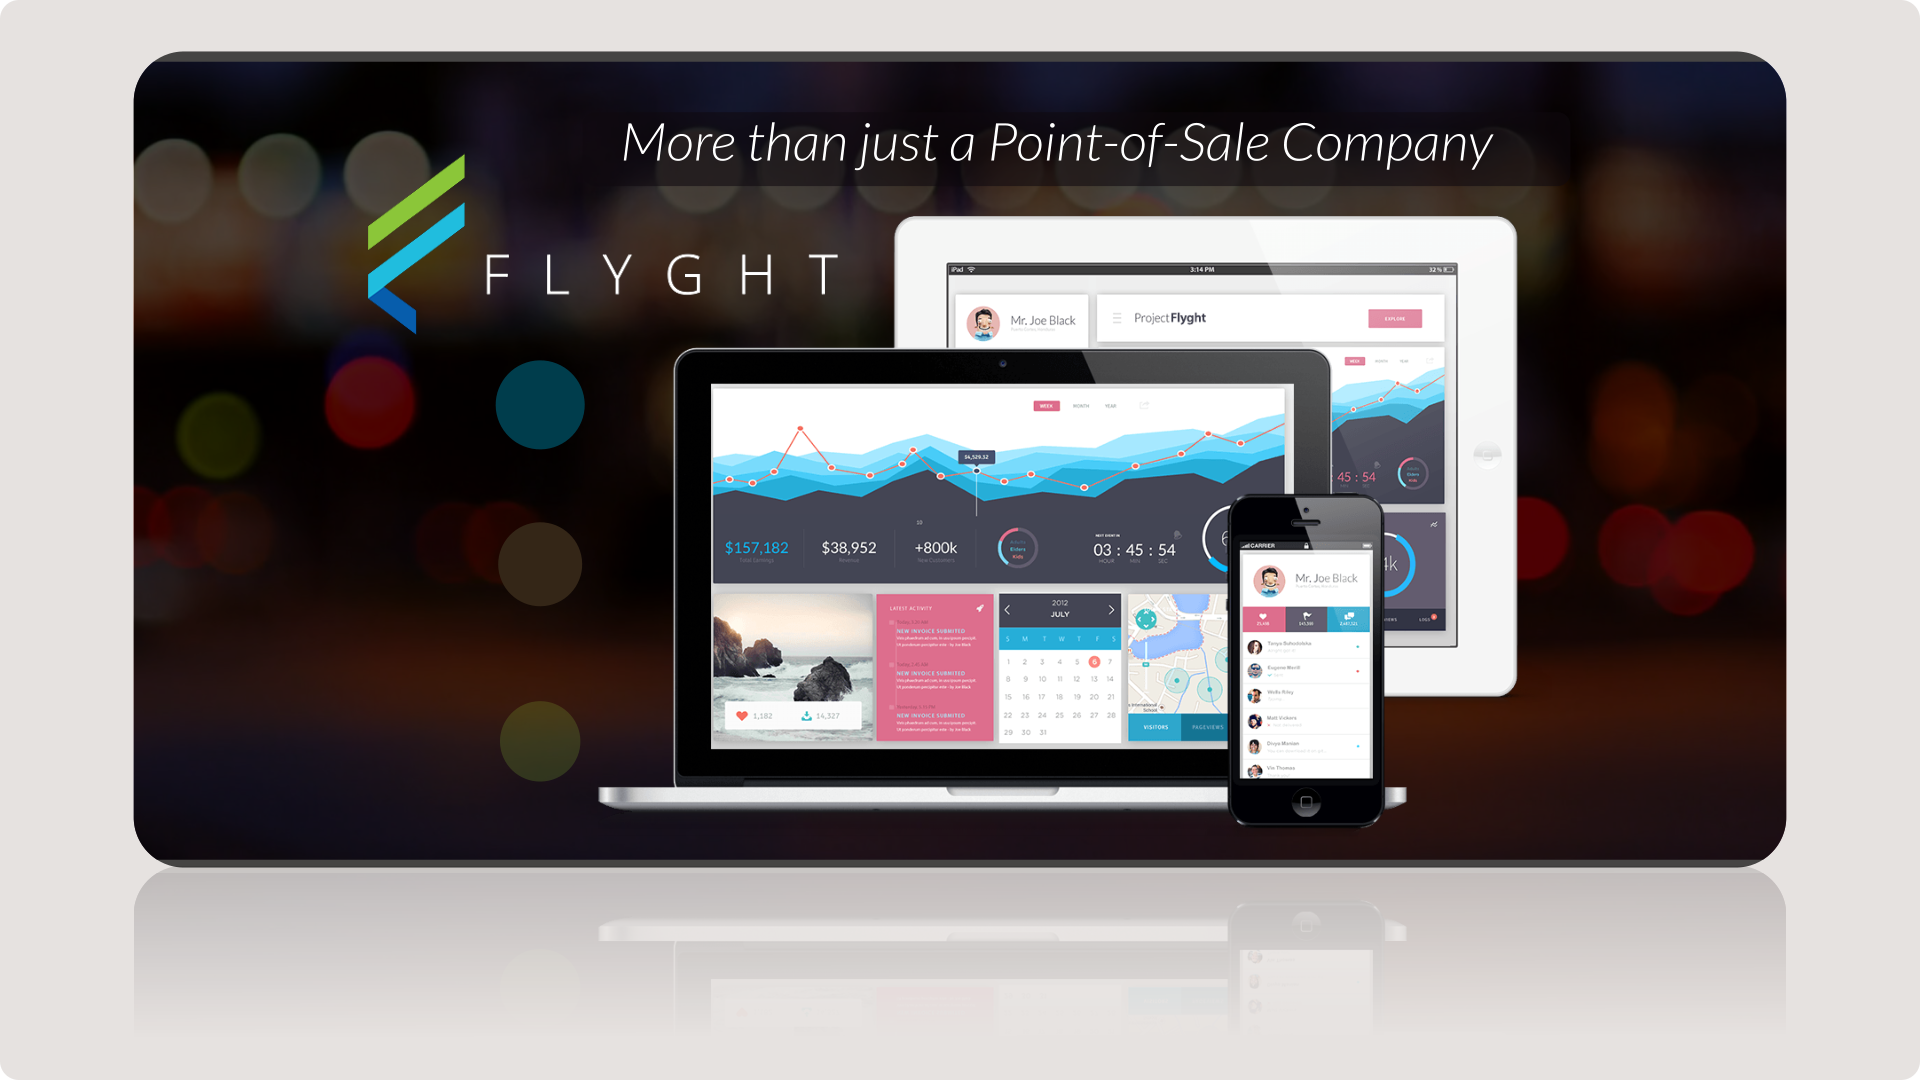 RabbitRun Empowers Business Transformation for Flyght, a Point-of-Sale (POS) Provider